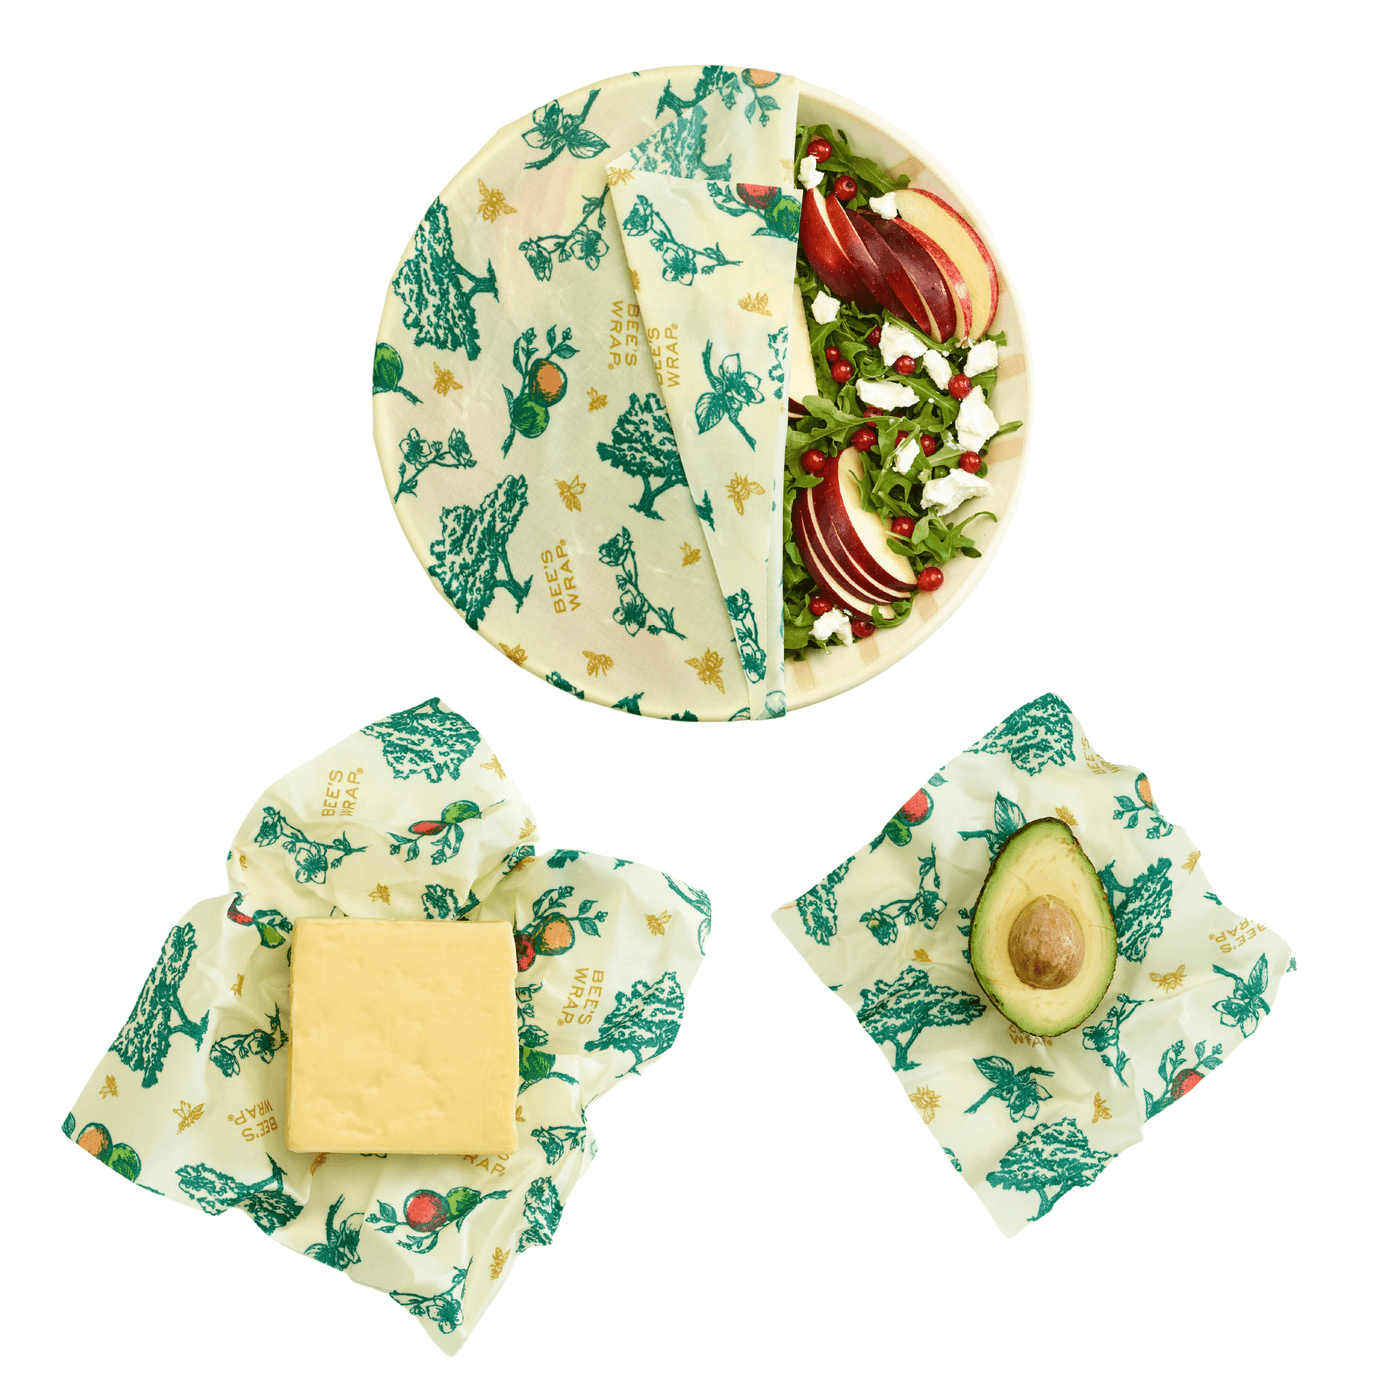 Bees Wax Wraps Reusable Reusable Wrap Set For Sandwich 3Pcs Zero Waste  Organic Sustainable Food Storage Packing Bag For Bread - AliExpress